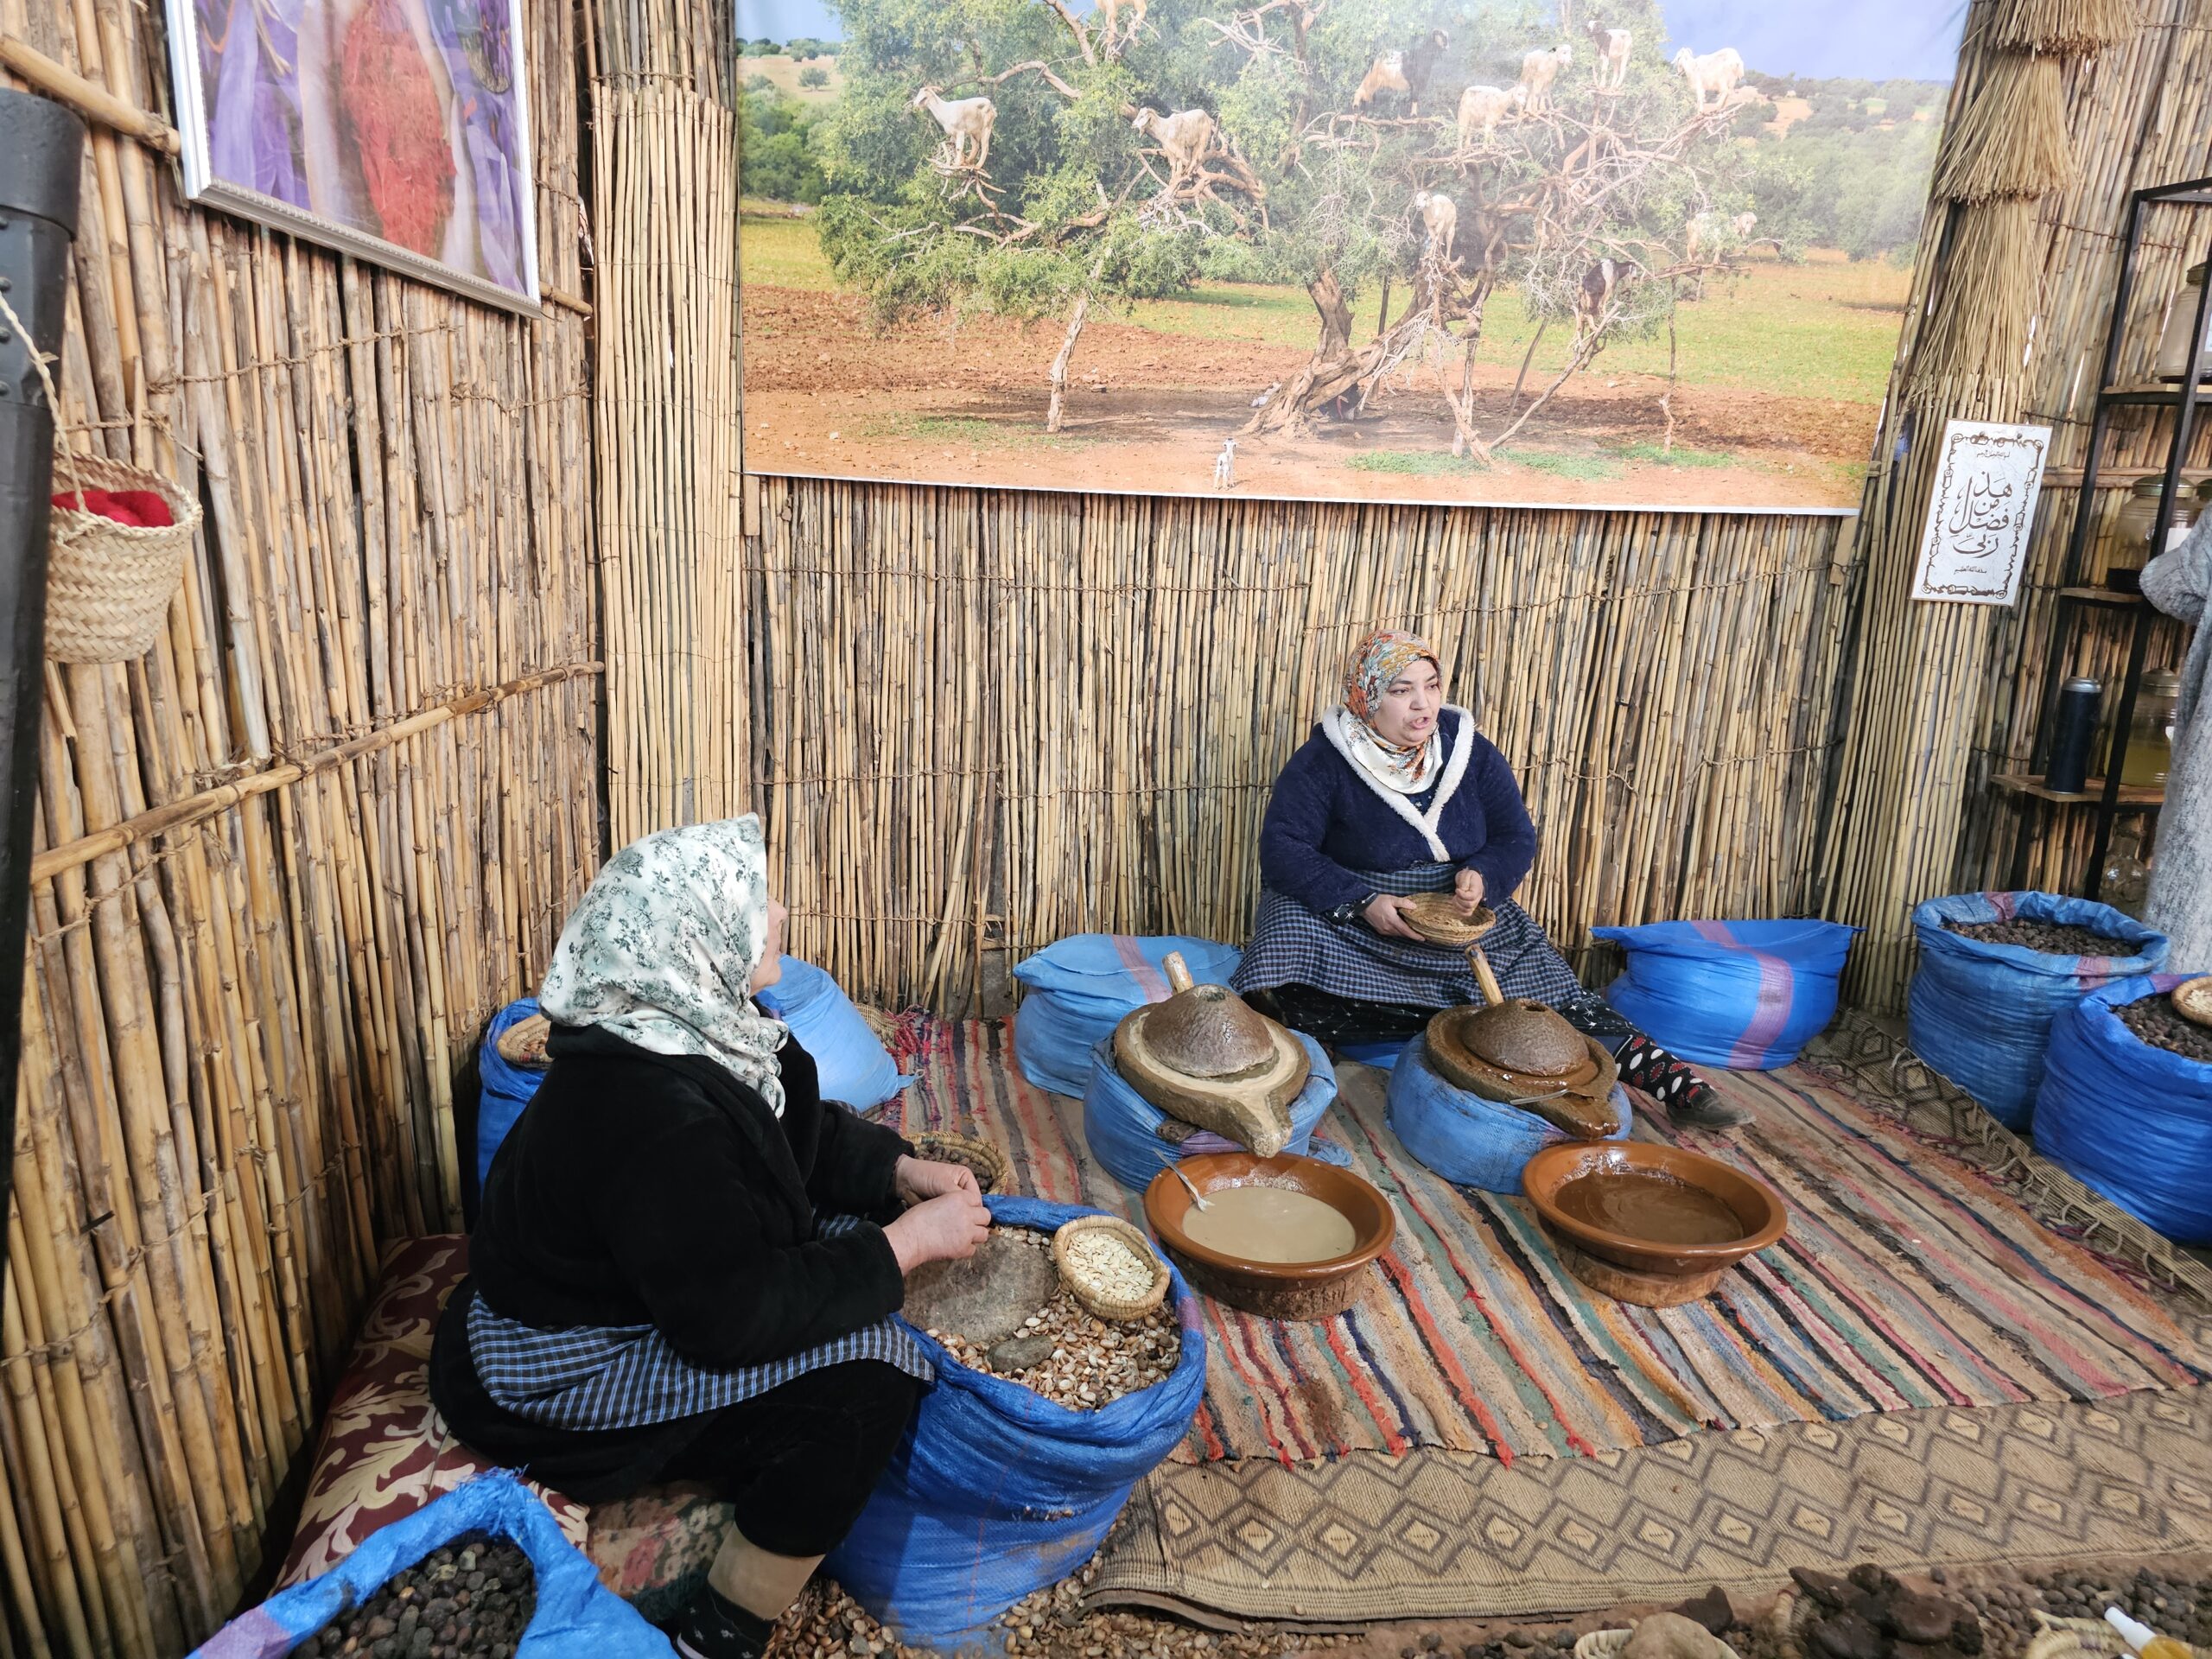 Women pressing argan seeds to extract argan oil. Ourika Valley, near Marrakesh. Image by 360onhistory.com